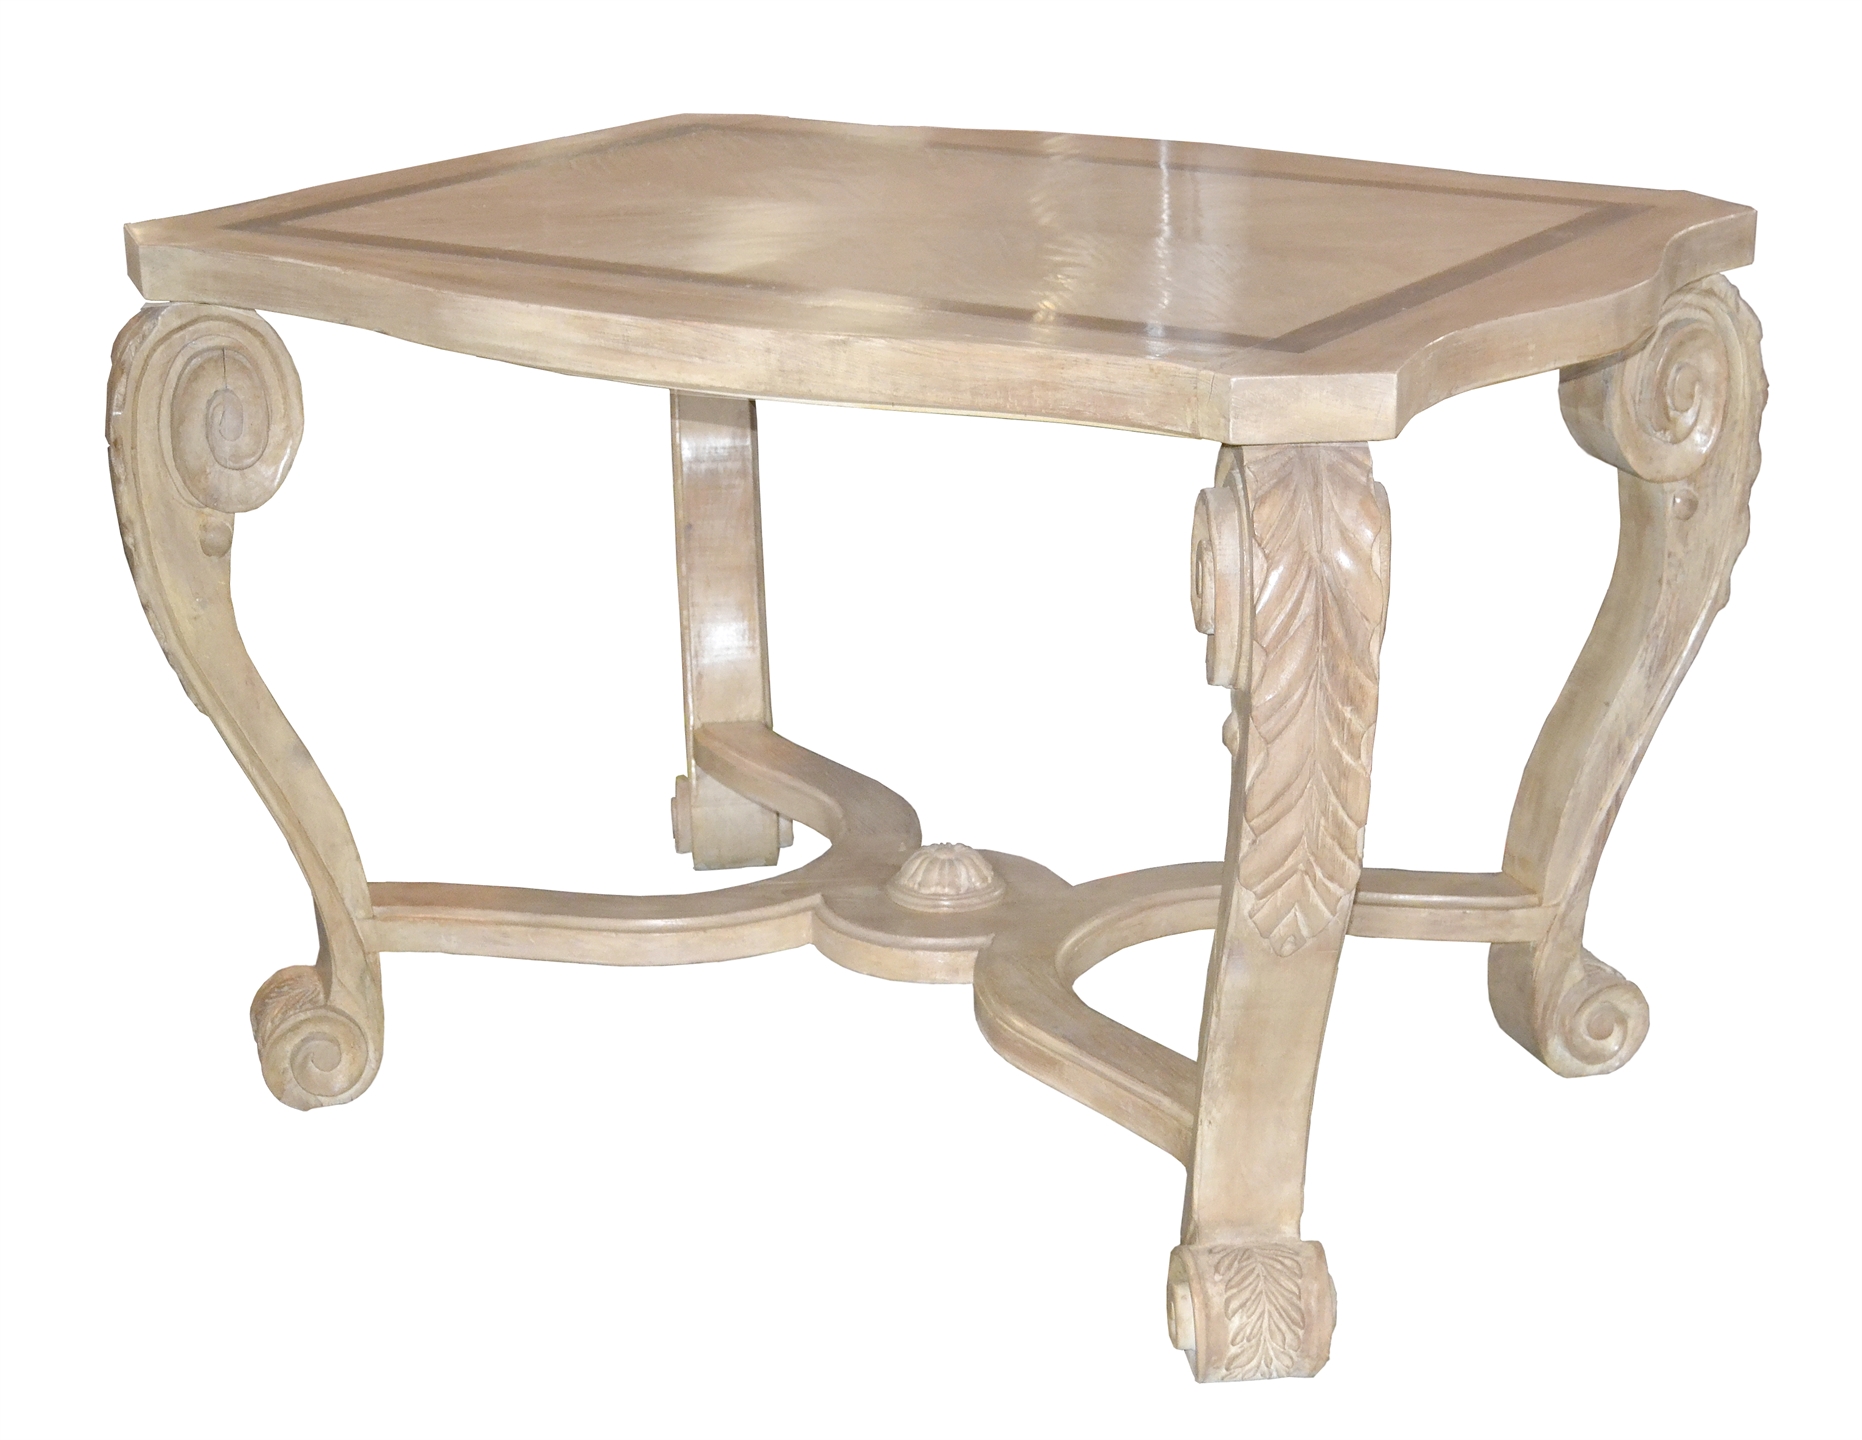 mb/1052 - Carved Kitchen Island